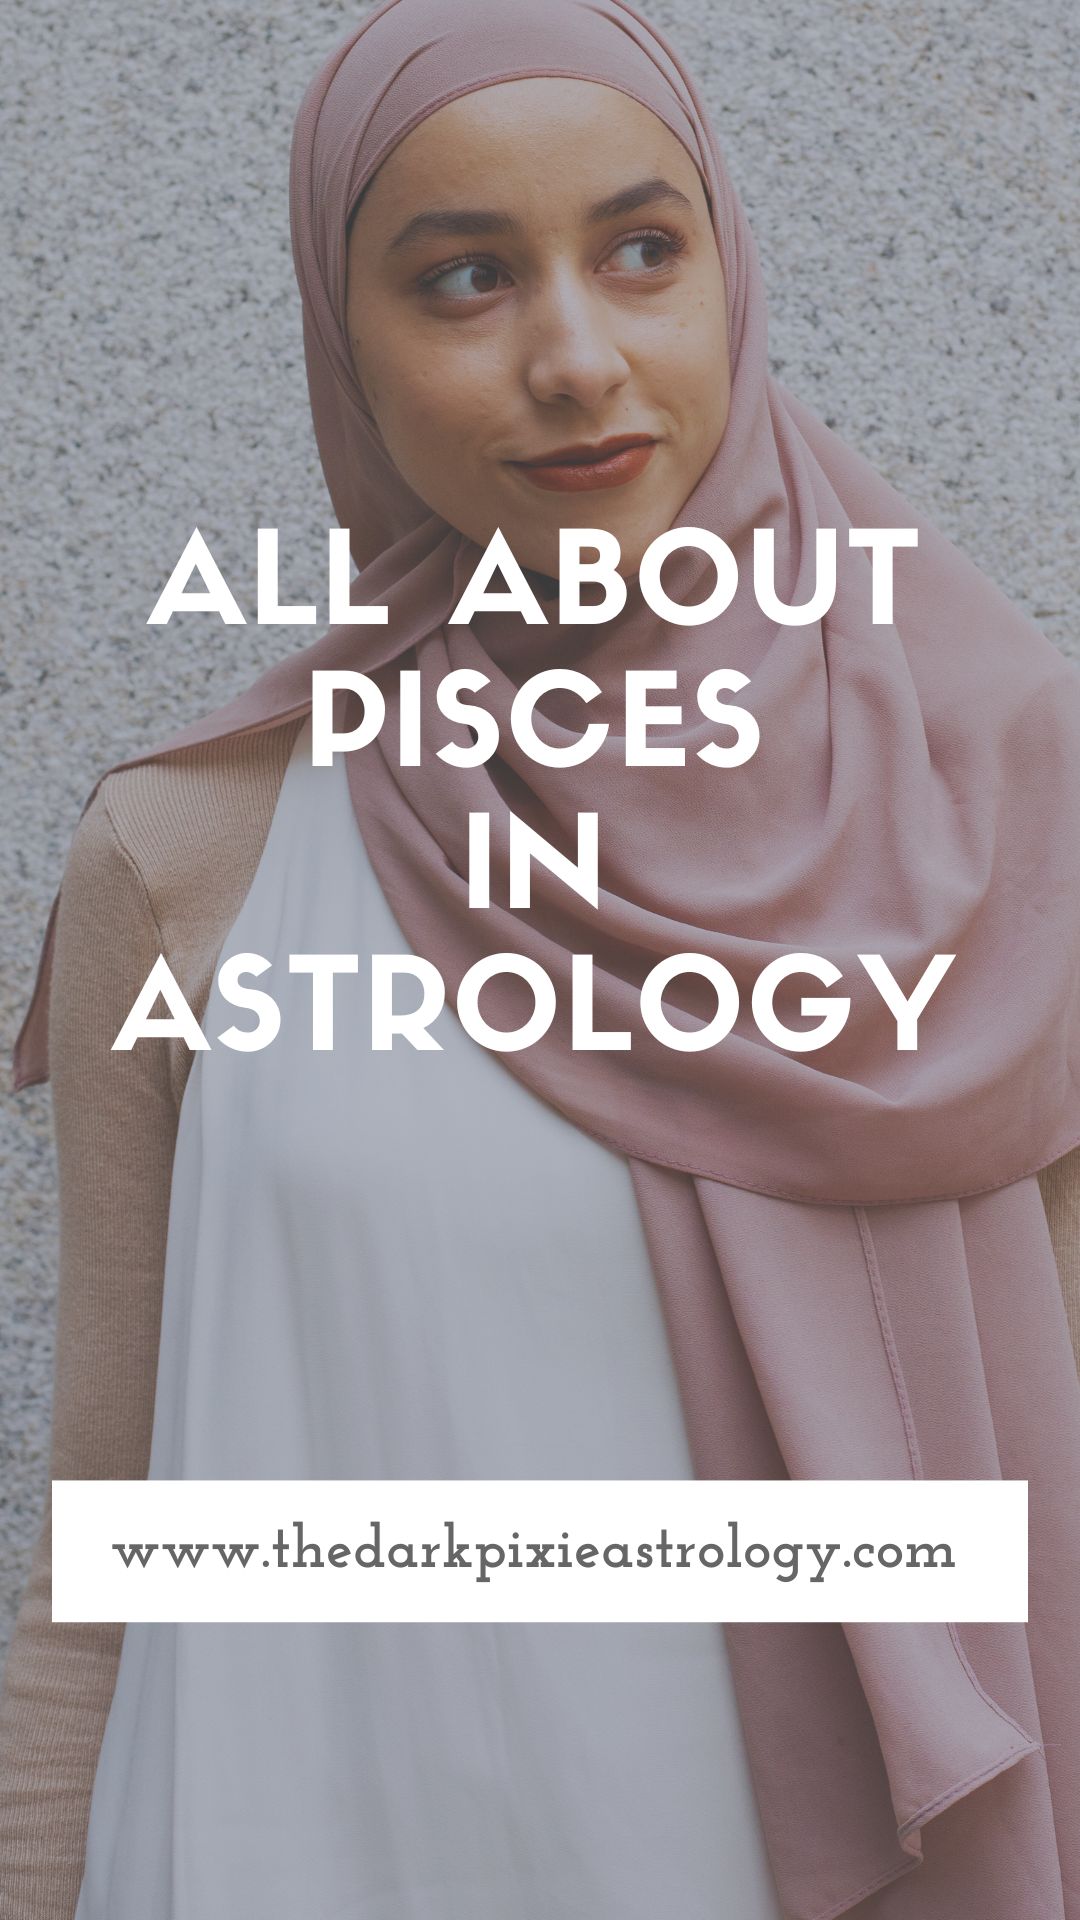 All About Pisces in Astrology - The Dark Pixie Astrology